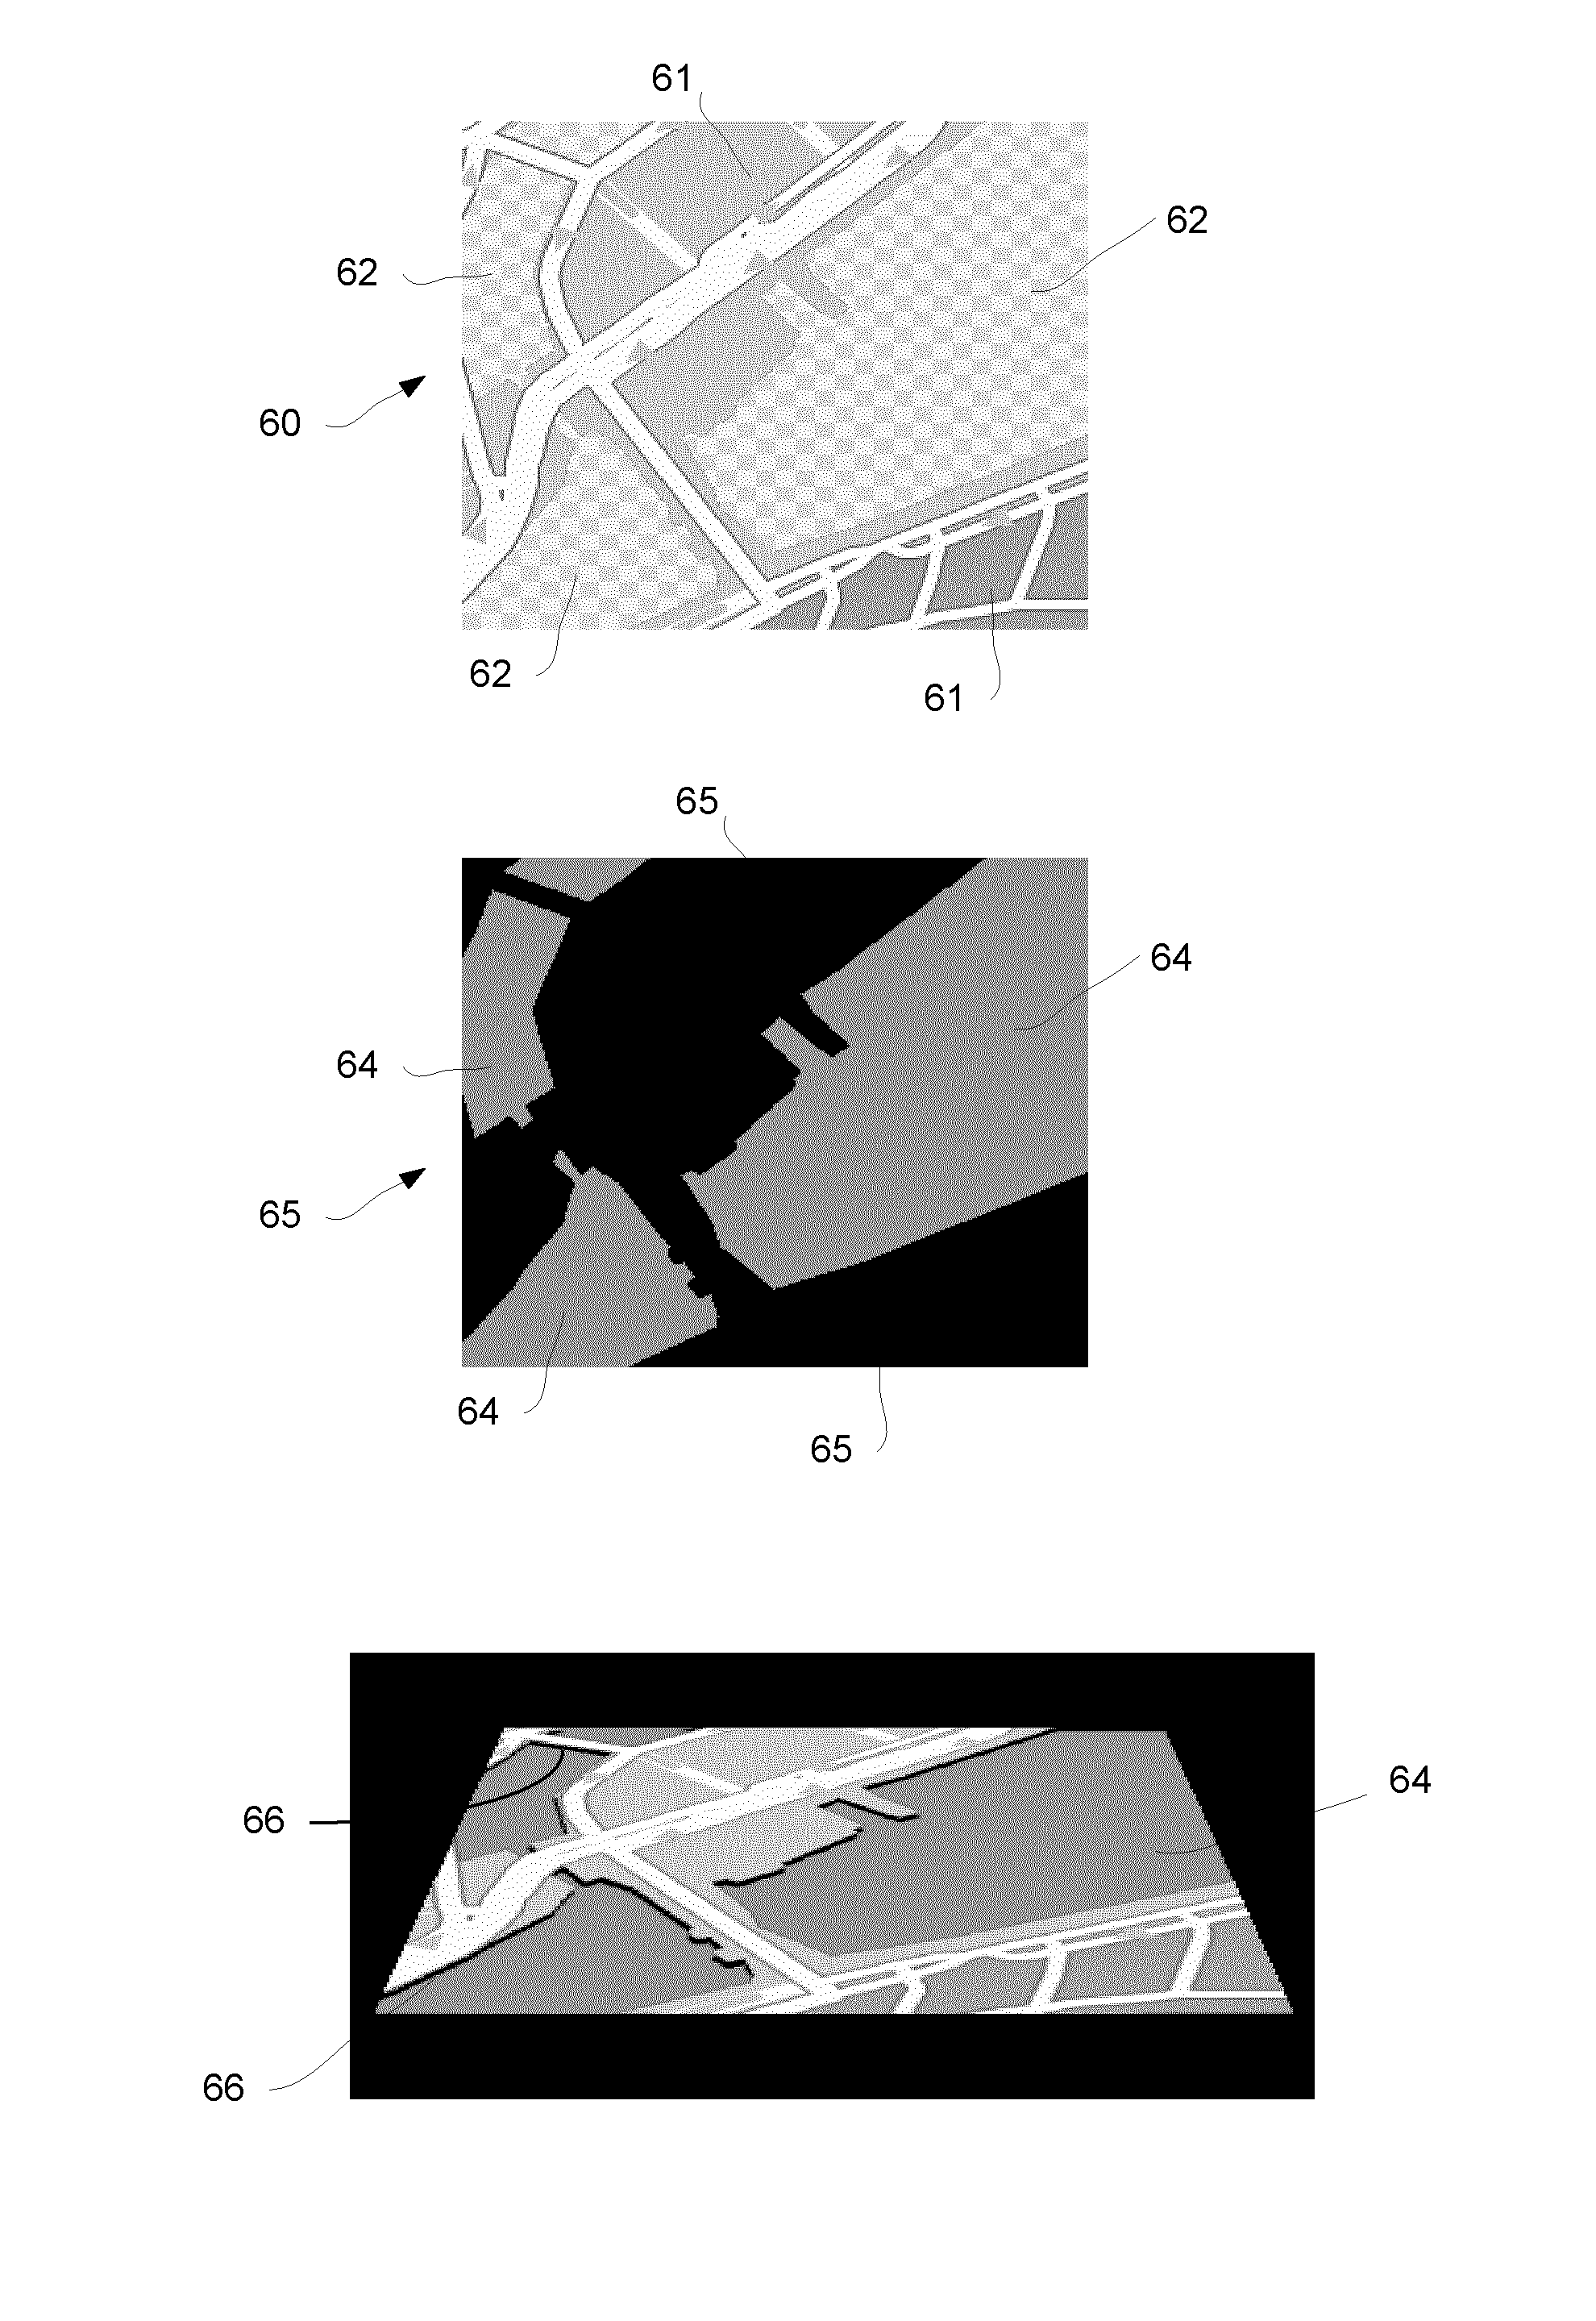 Methods of and apparatus for displaying map information